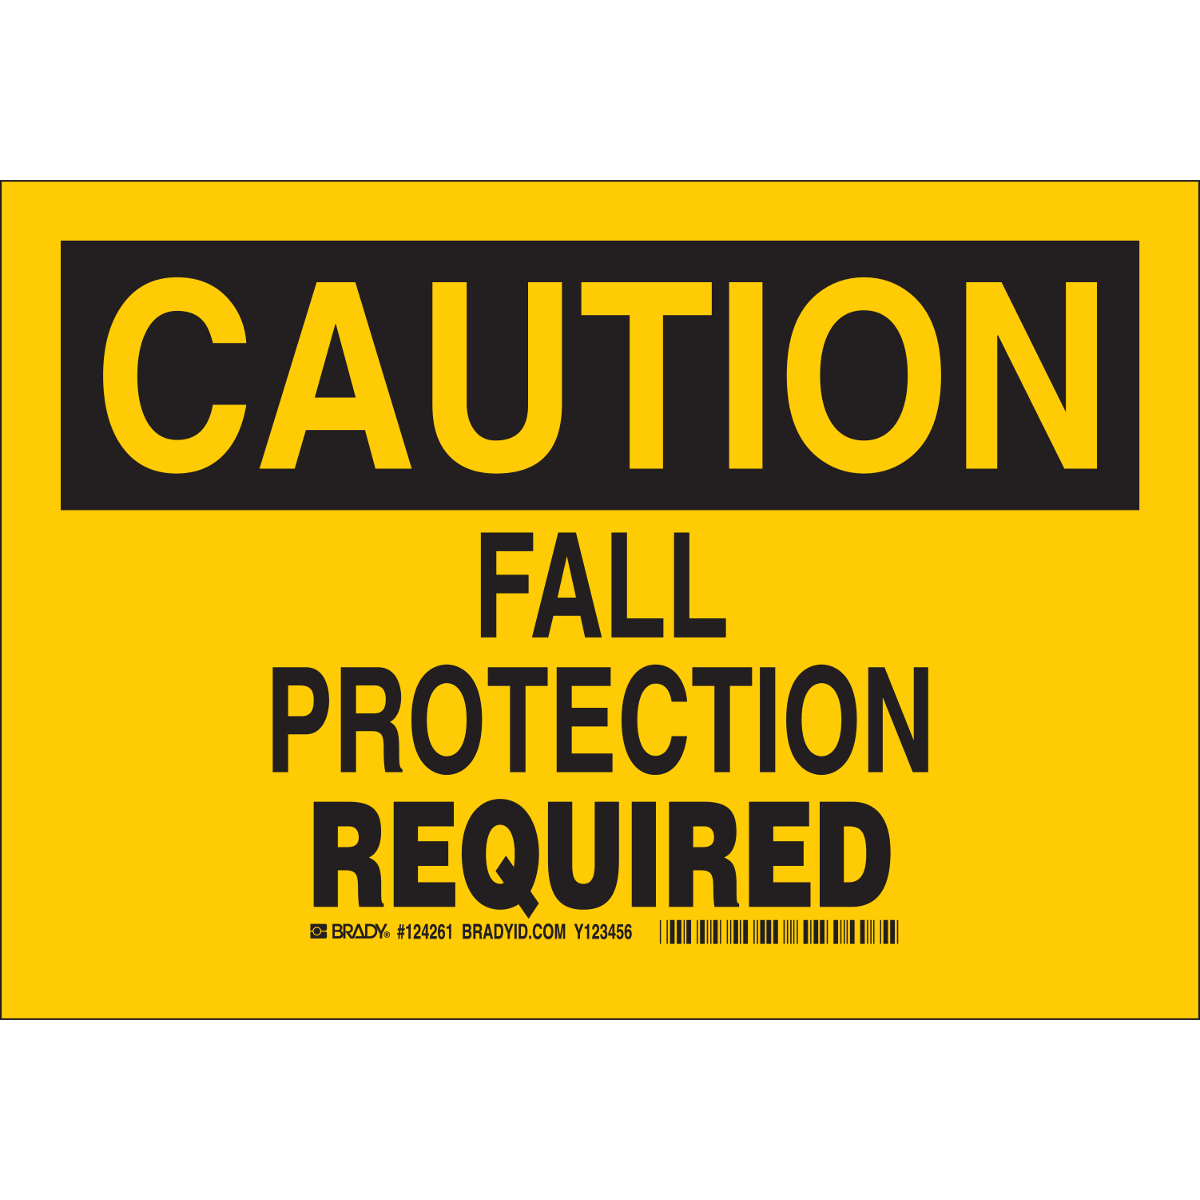 10 Width LegendFall Protection Required Black on Yellow Brady 124259 Personal Protection Sign 7 Height 